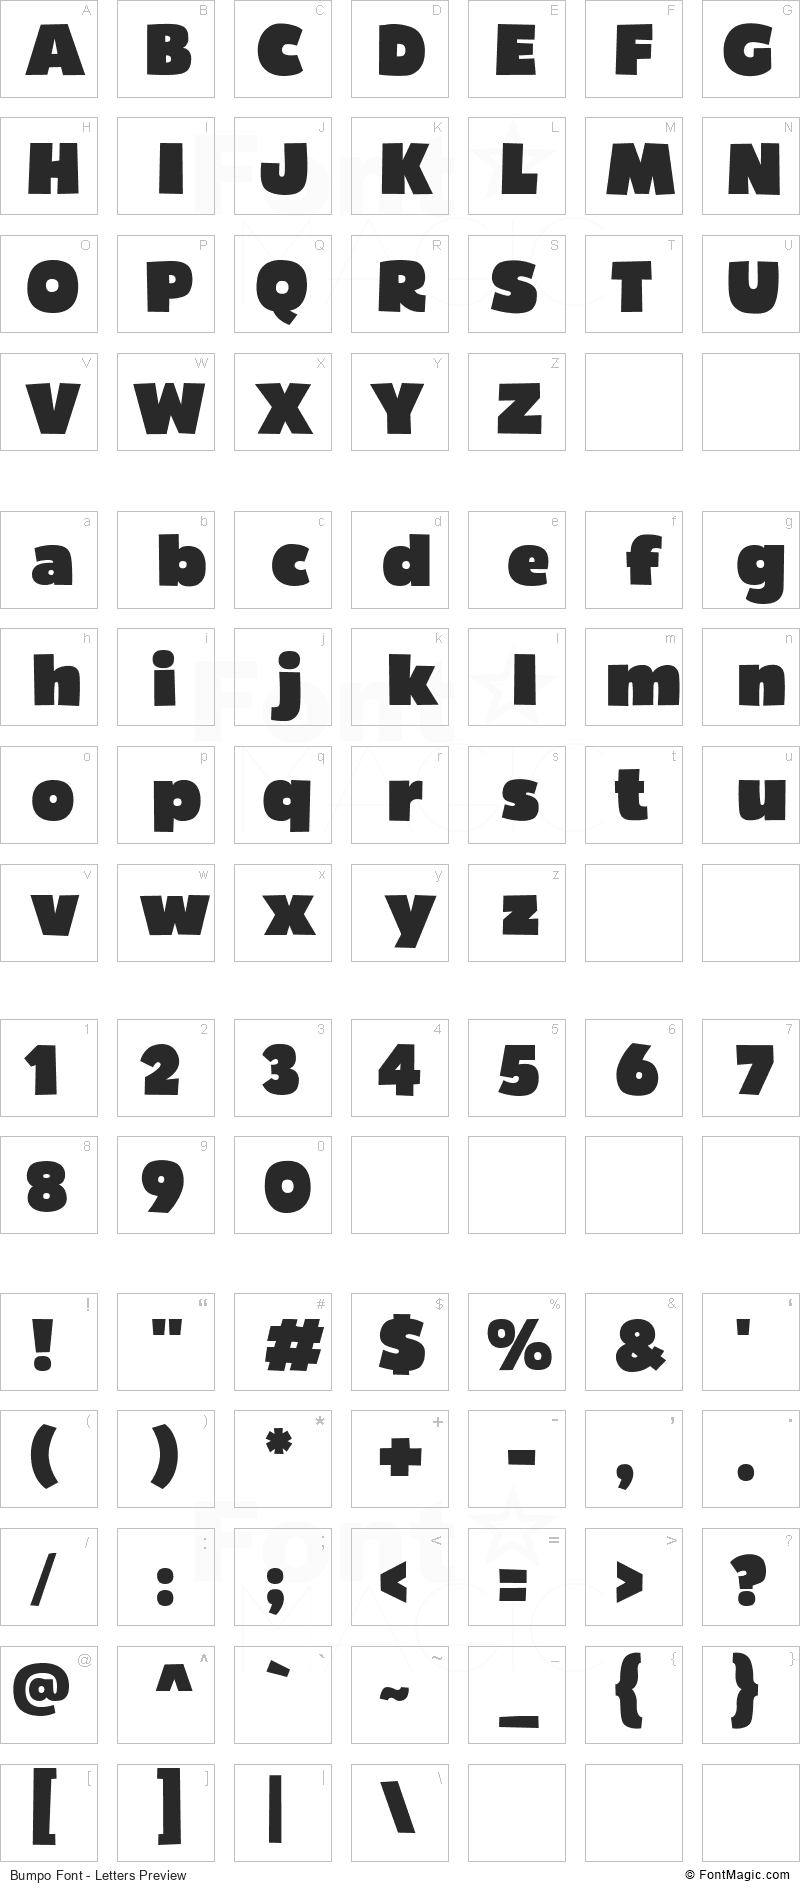 Bumpo Font - All Latters Preview Chart